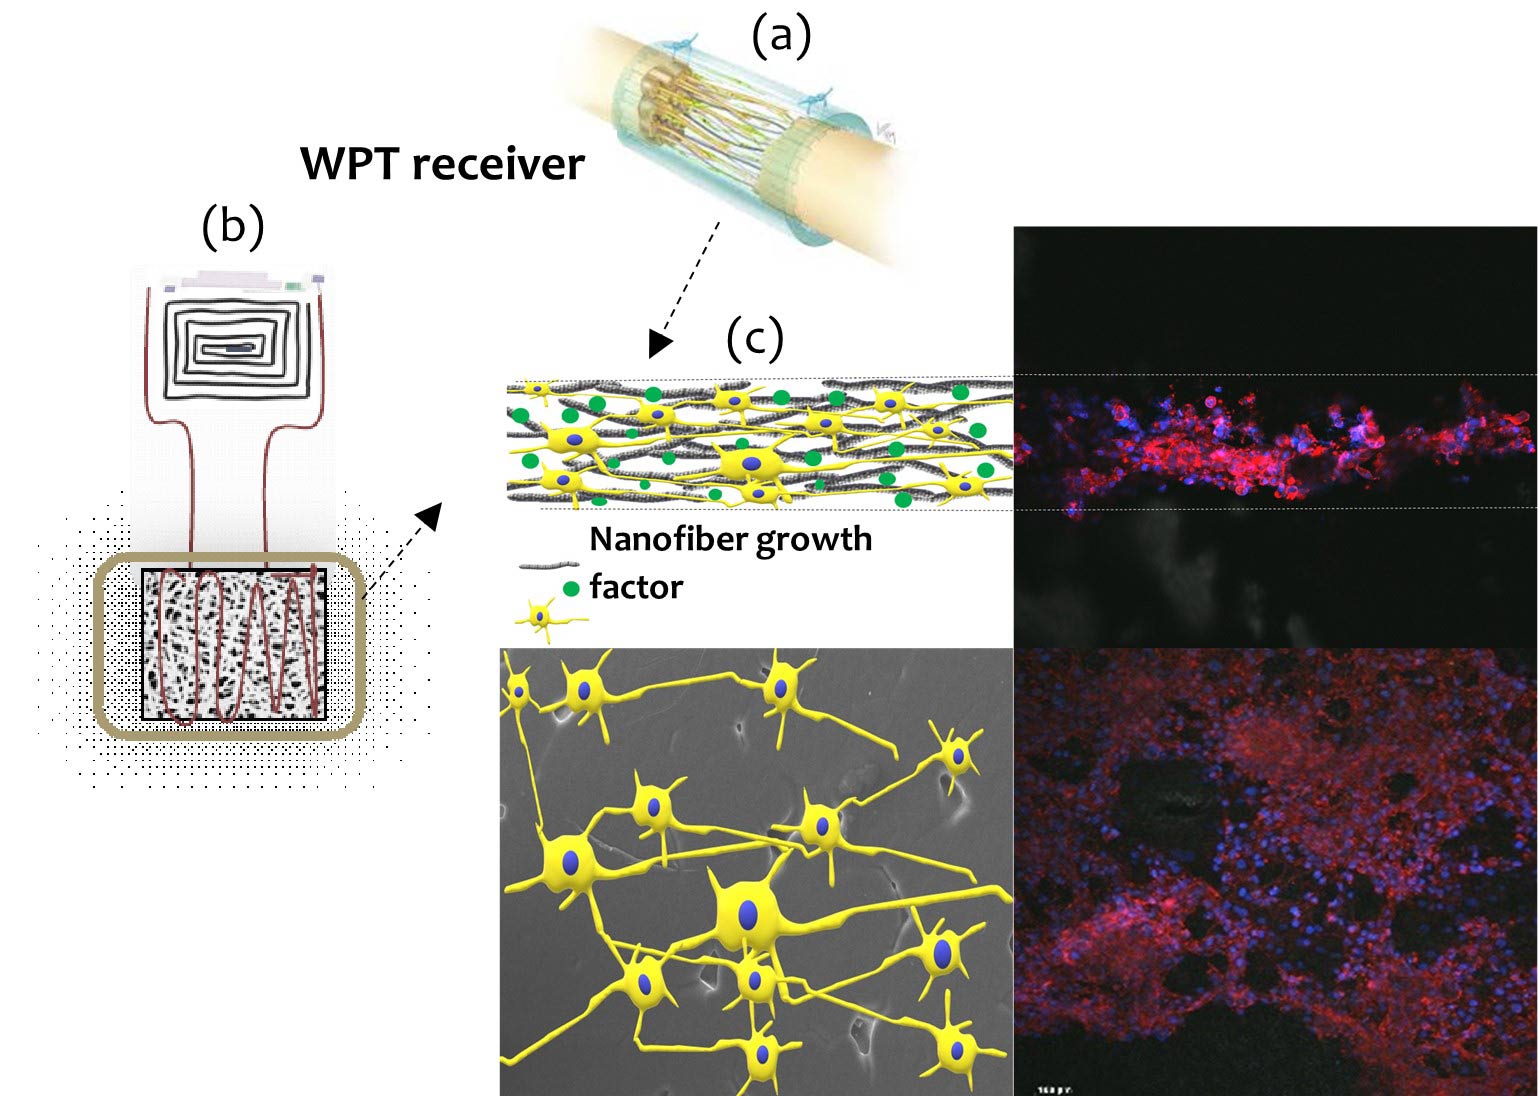 Figure 1: (a) Illustration of nerve conduit, (b) illustration of proposed electroconductive nerve conduit with WPT, and (c) resulting patterns & images of nerve cell growth.